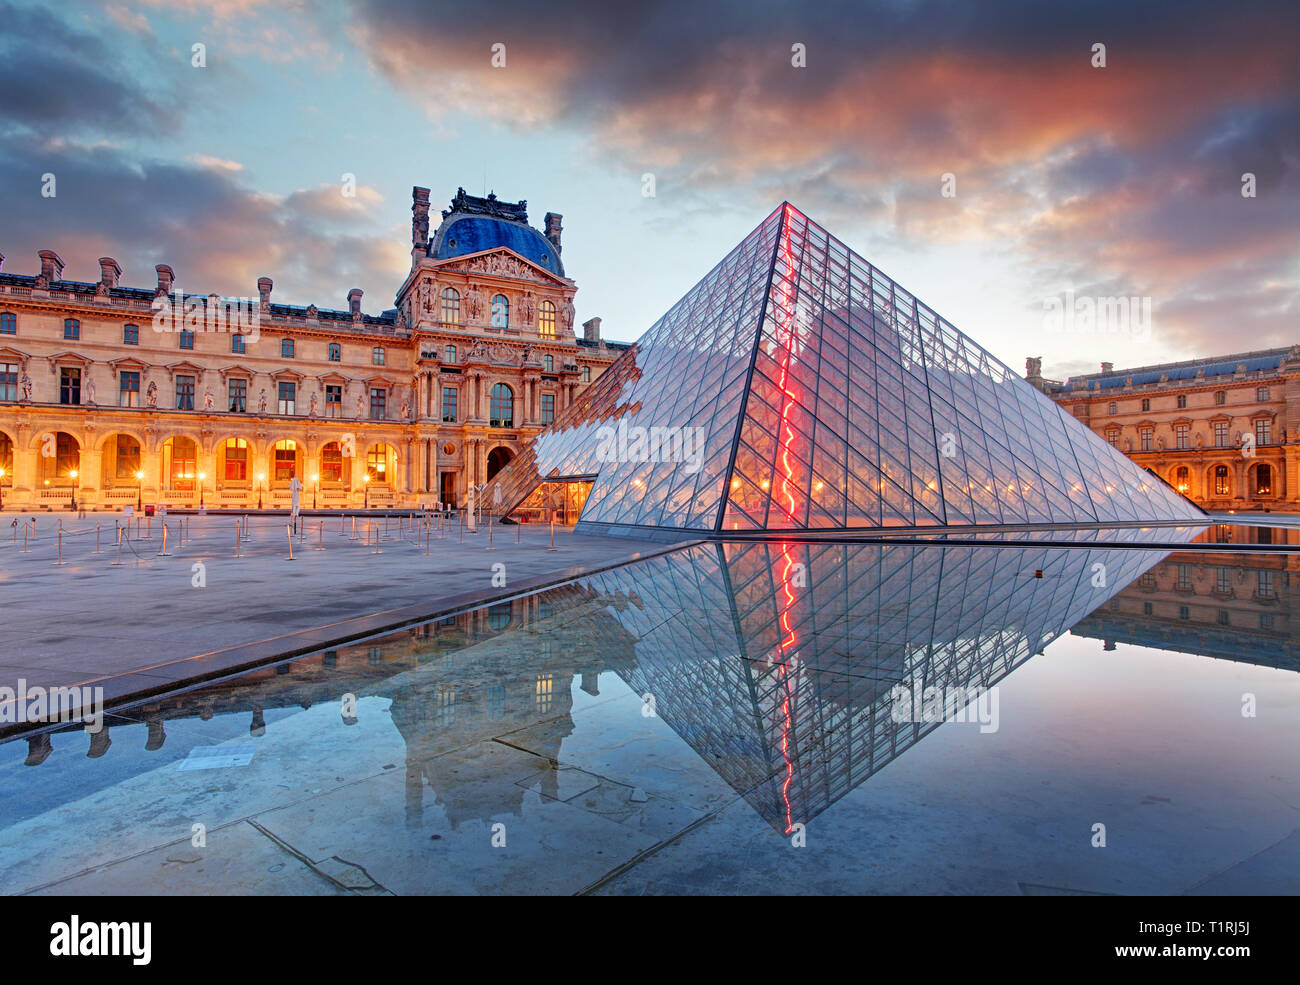 Paris, France - February 9, 2015: The Louvre Museum is one of the world's largest museums and a historic monument. A central landmark of Paris, France Stock Photo